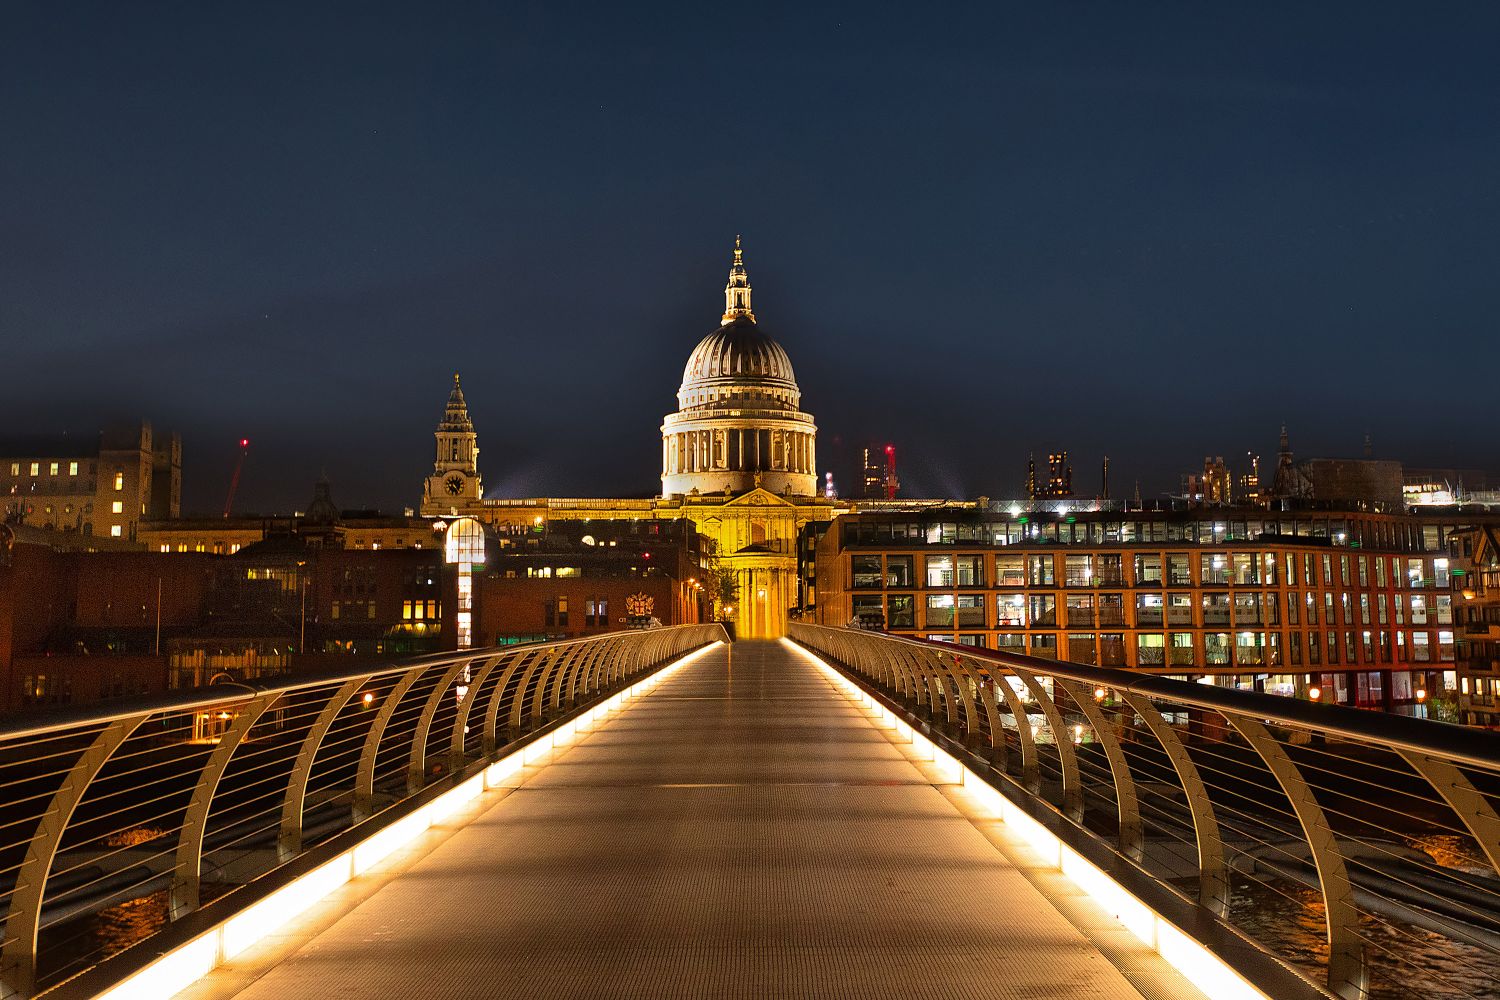 St Paul's from the Millennium Bridge London at night by Martin Lawrence Photography